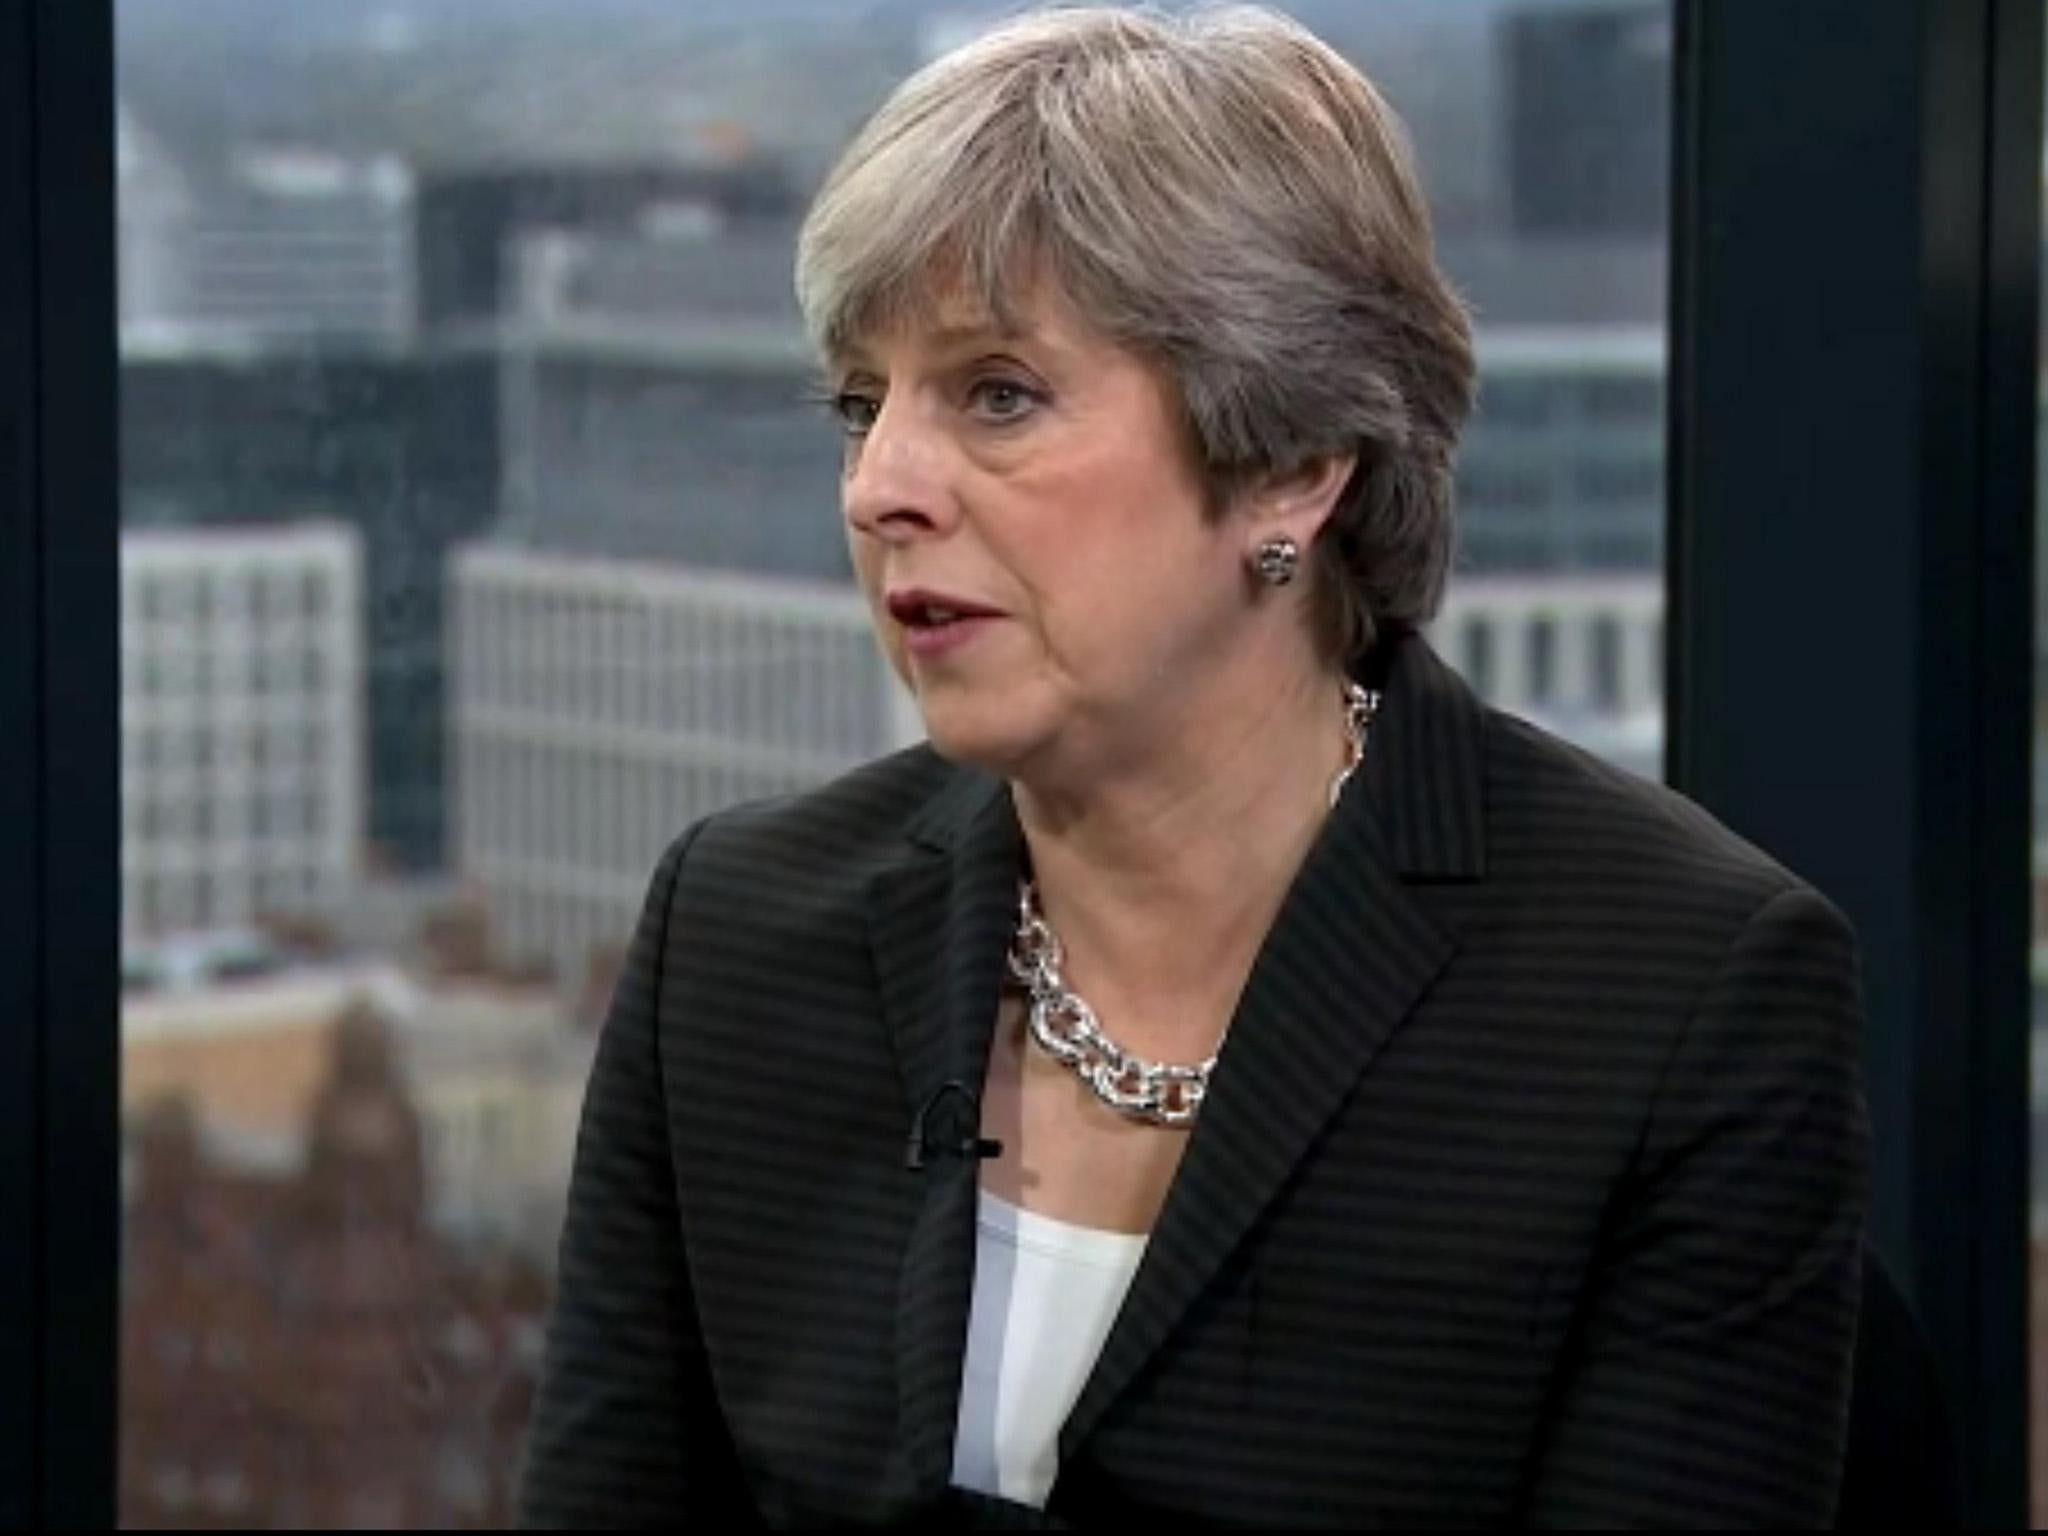 Theresa May admitted she had not met any of the victims of the Manchester bombing